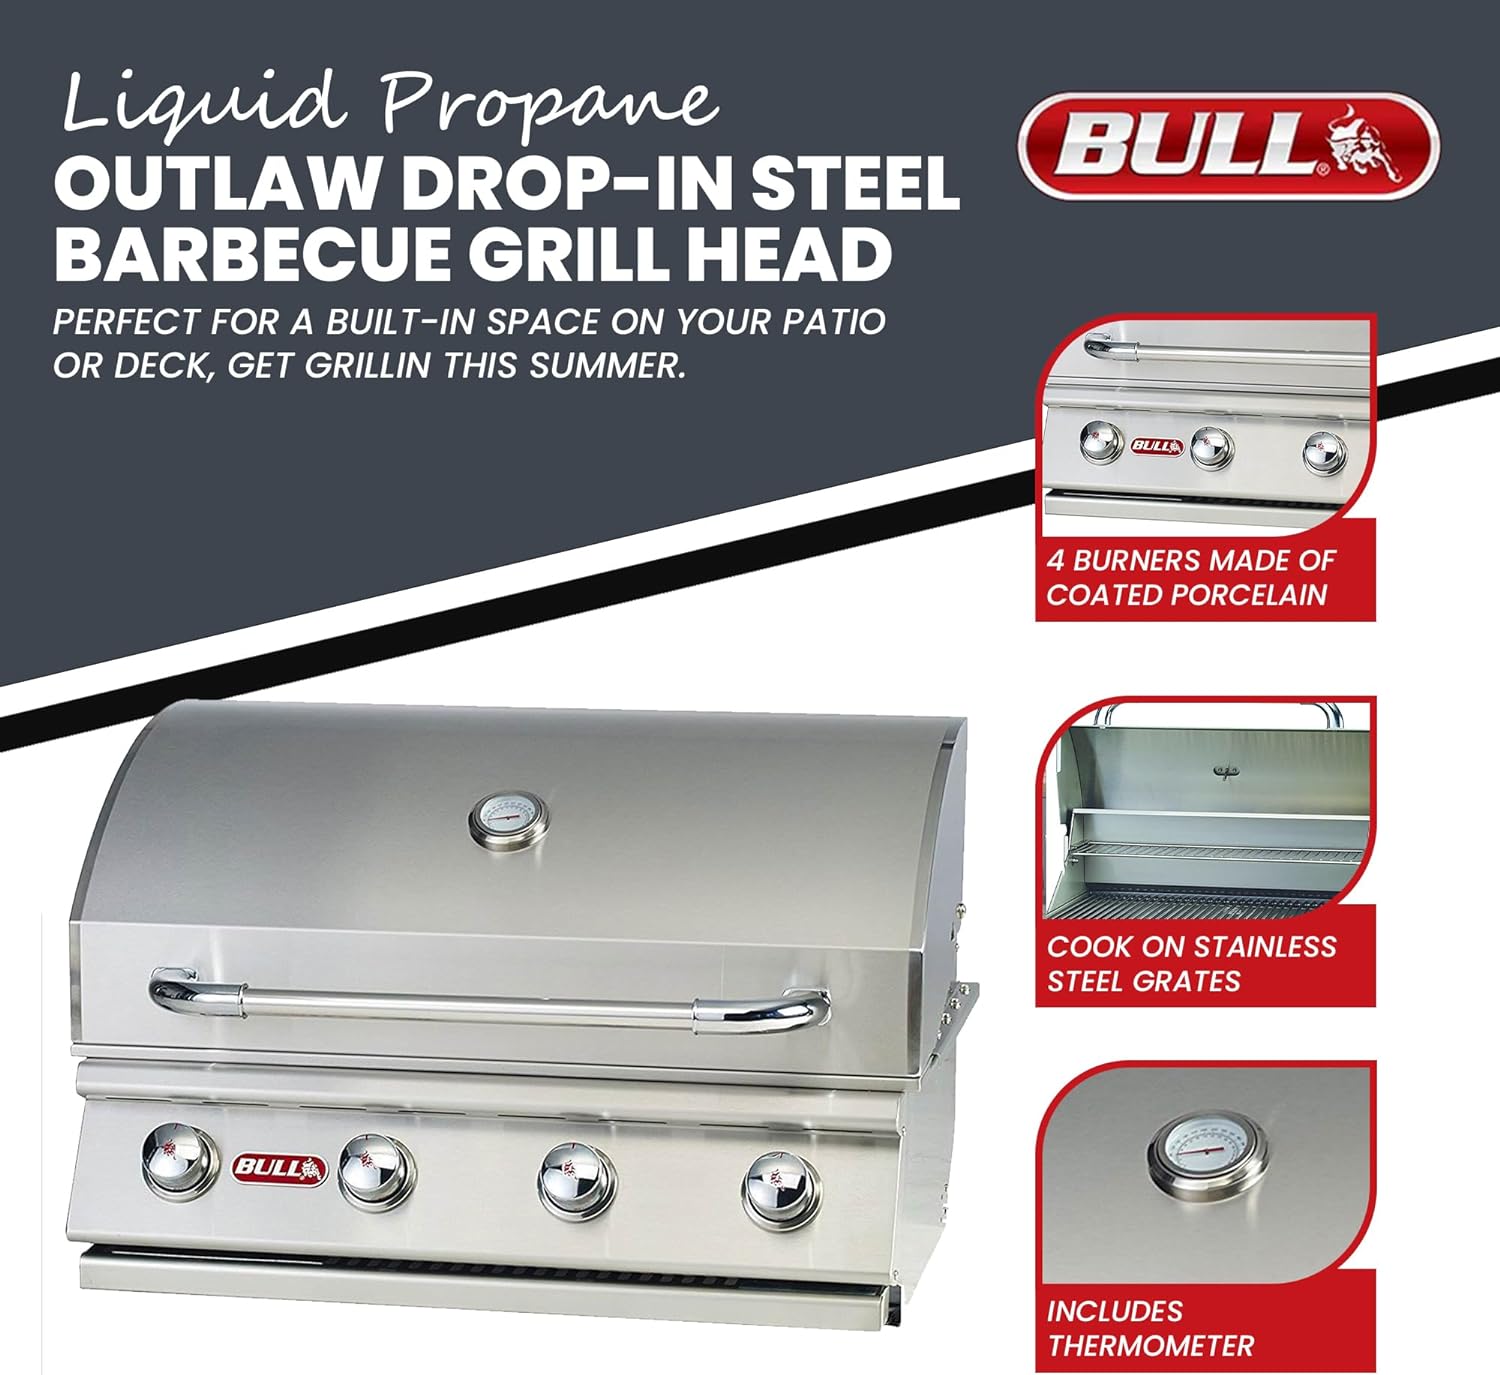 BULL OUTDOOR PRODUCTS 30" Liquid Propane Outlaw Stainless Steel Gas Grill Head - 4 Burner